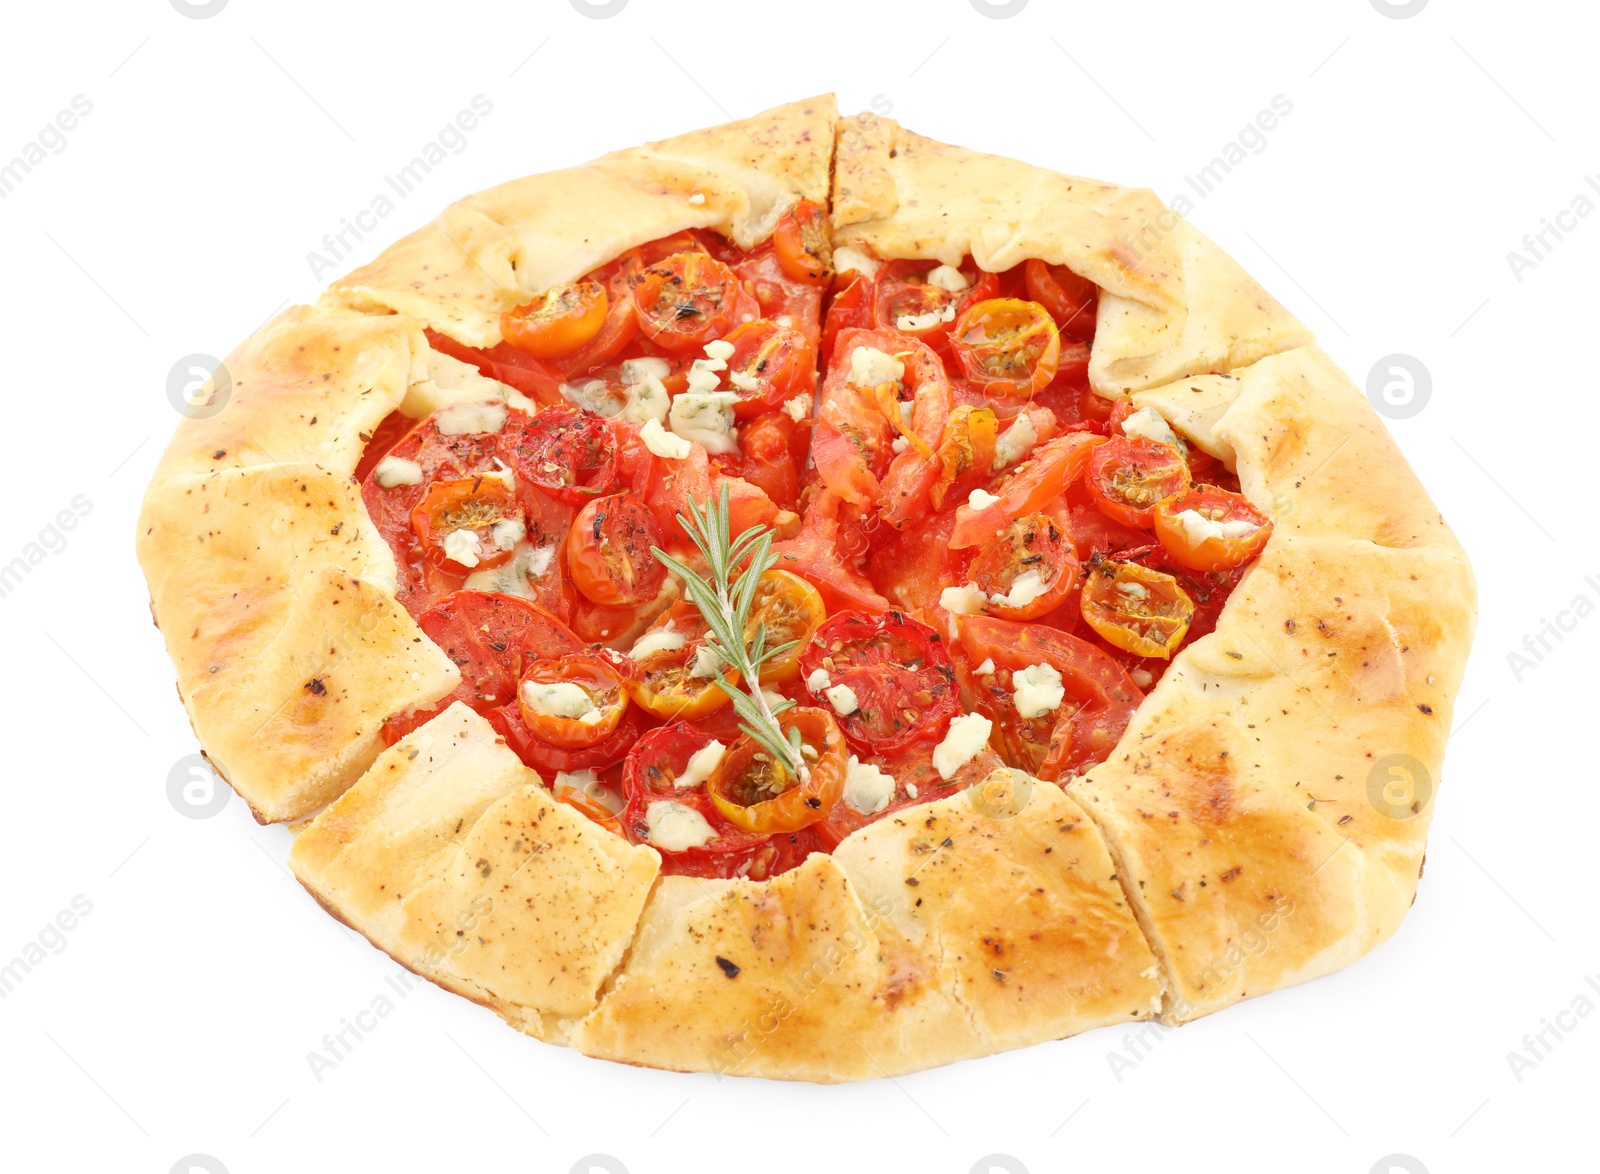 Photo of Tasty galette with tomato, rosemary and cheese (Caprese galette) isolated on white